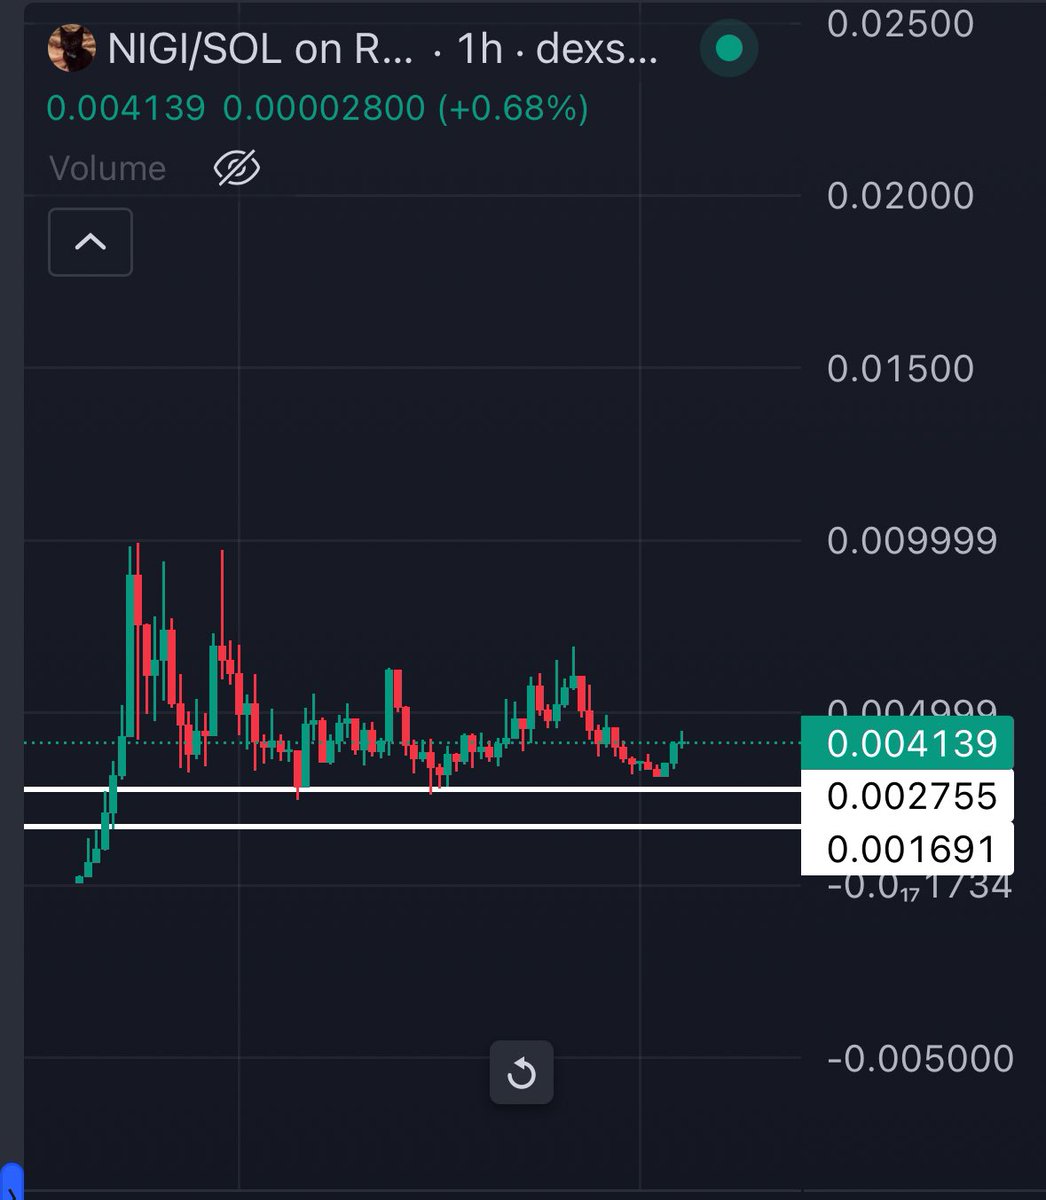 Added more to my bags as $Nigi touched my lines one more time. 

I think this should br the last tap and we are done with redistribution and accumulation here. Send it back to ATH else market is wrong bros 🫵